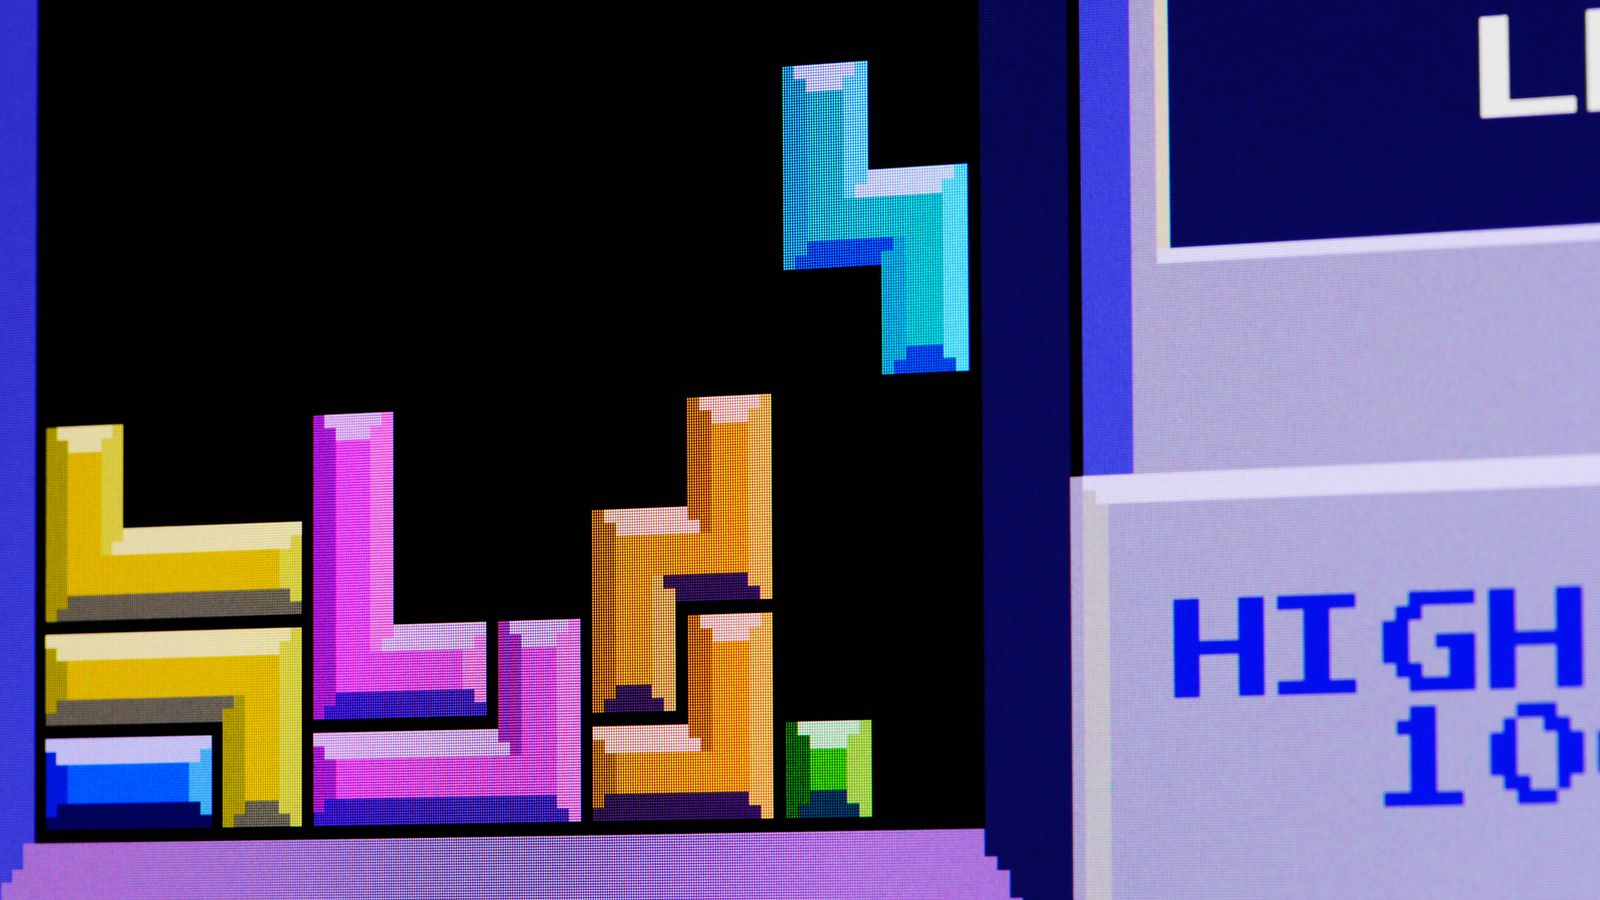 A teenage player becomes the first person to “beat” Tetris |  Scientific and technological news.